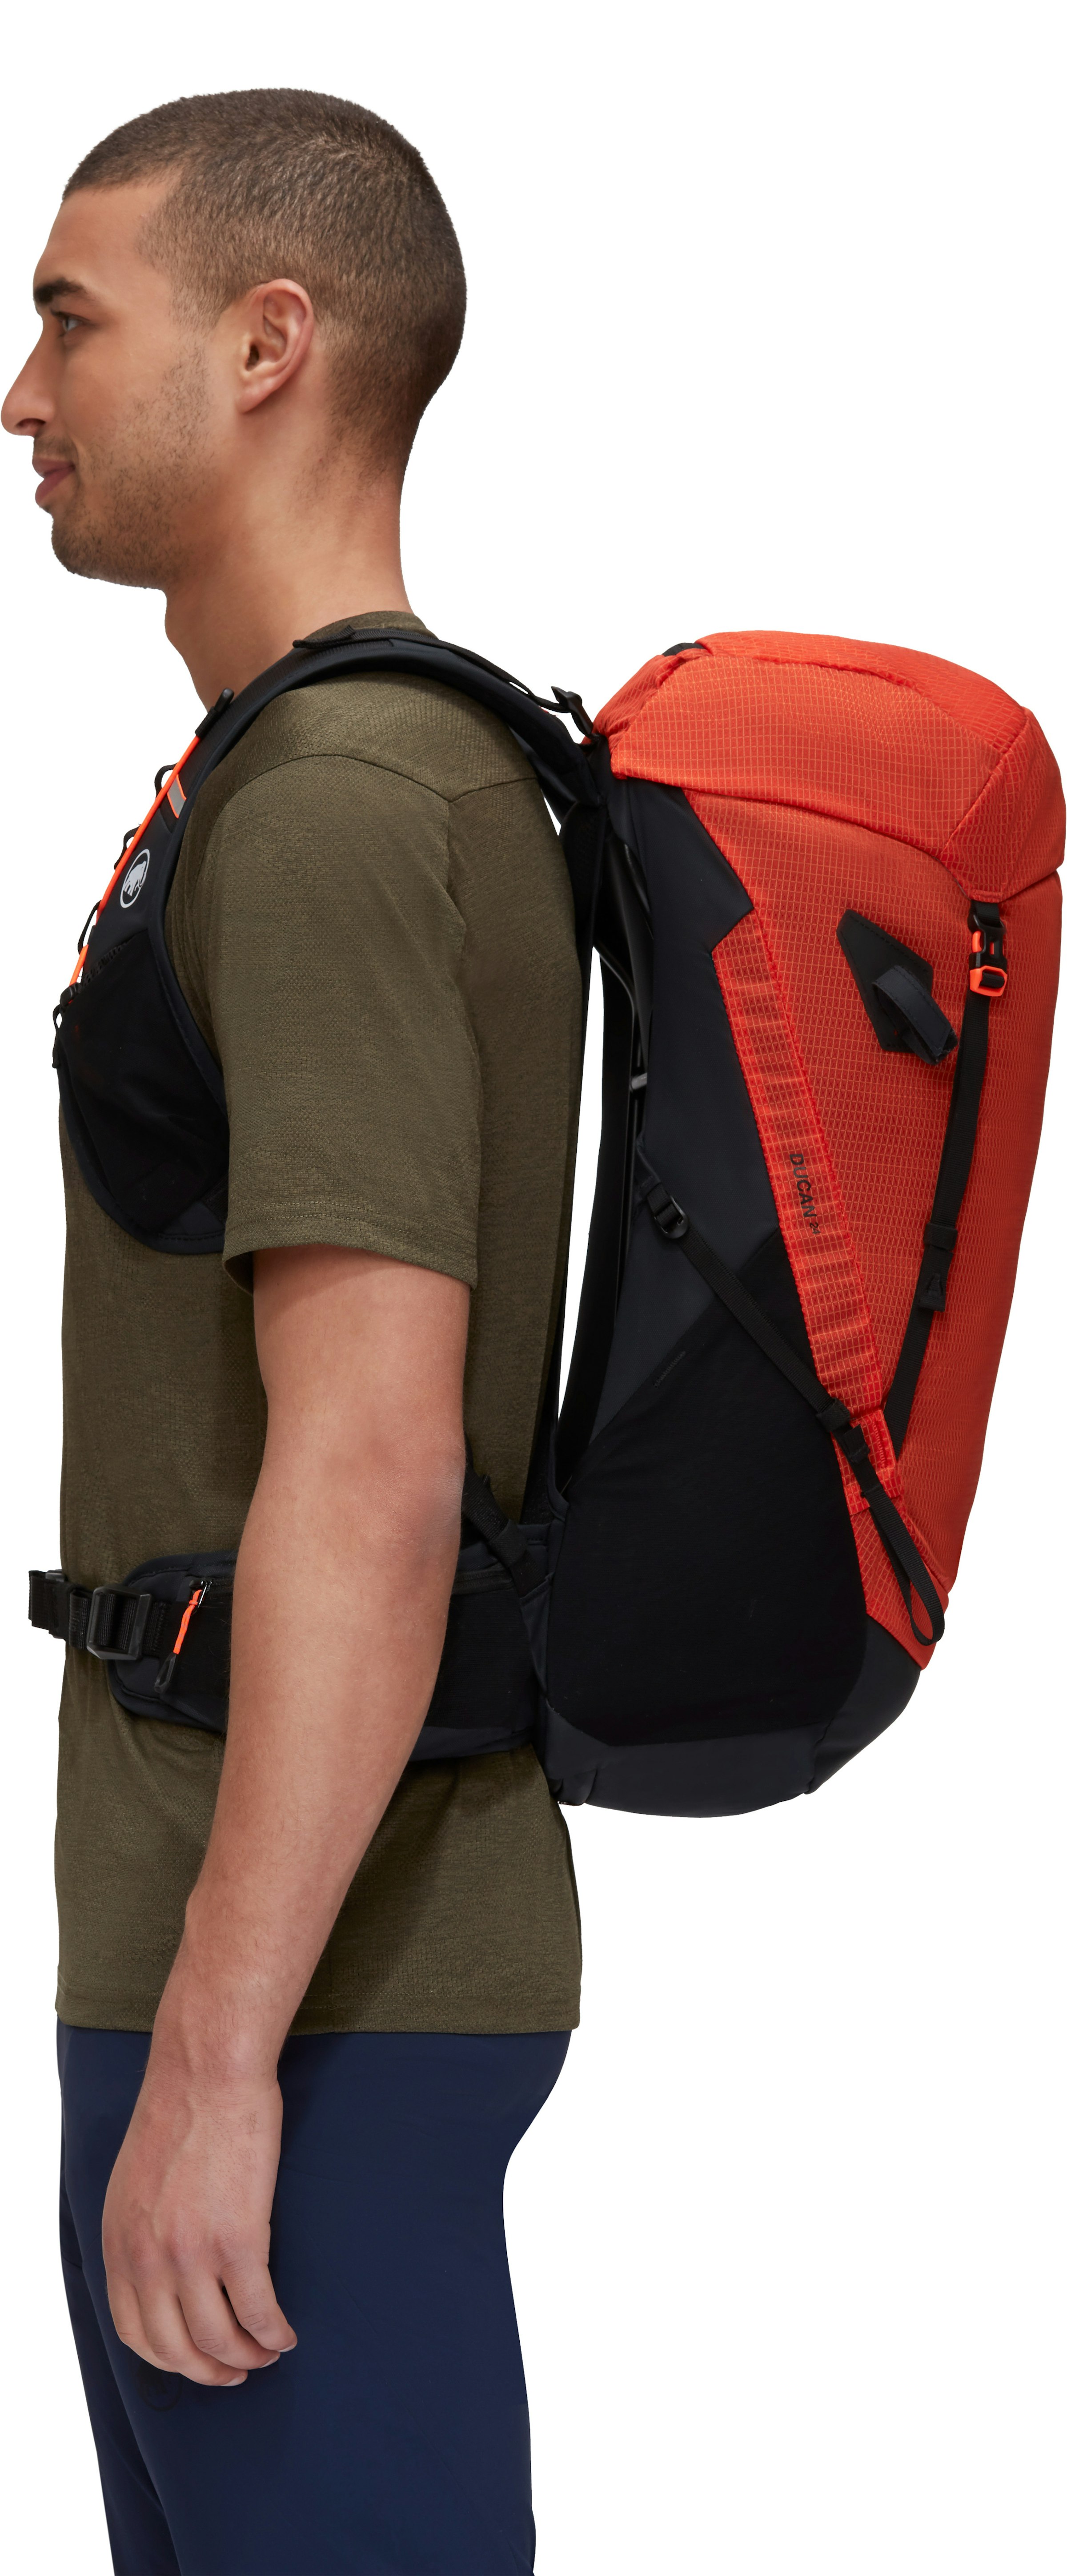 A design that keeps the space between your back and the backpack tight, without arching it